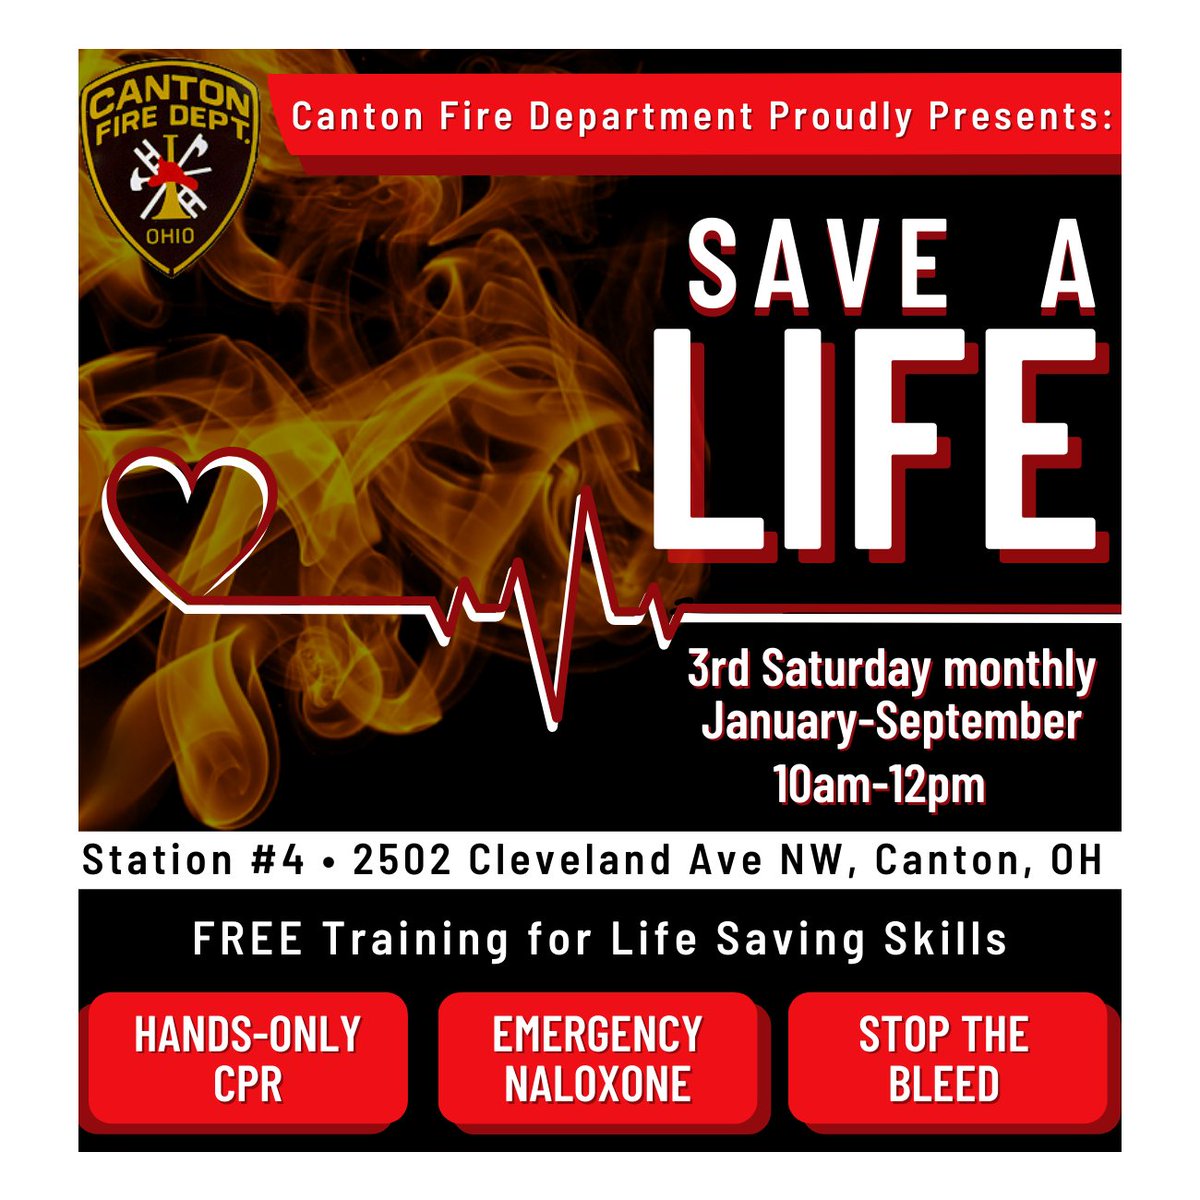 Effective trauma care starts the moment an injury or life-threatening event occurs, meaning it is often a bystander that helps to give our patients a second chance at life!

Join an upcoming ‘Save a Life’ event to learn life-saving skills. Register: outlook.office365.com/owa/calendar/H…